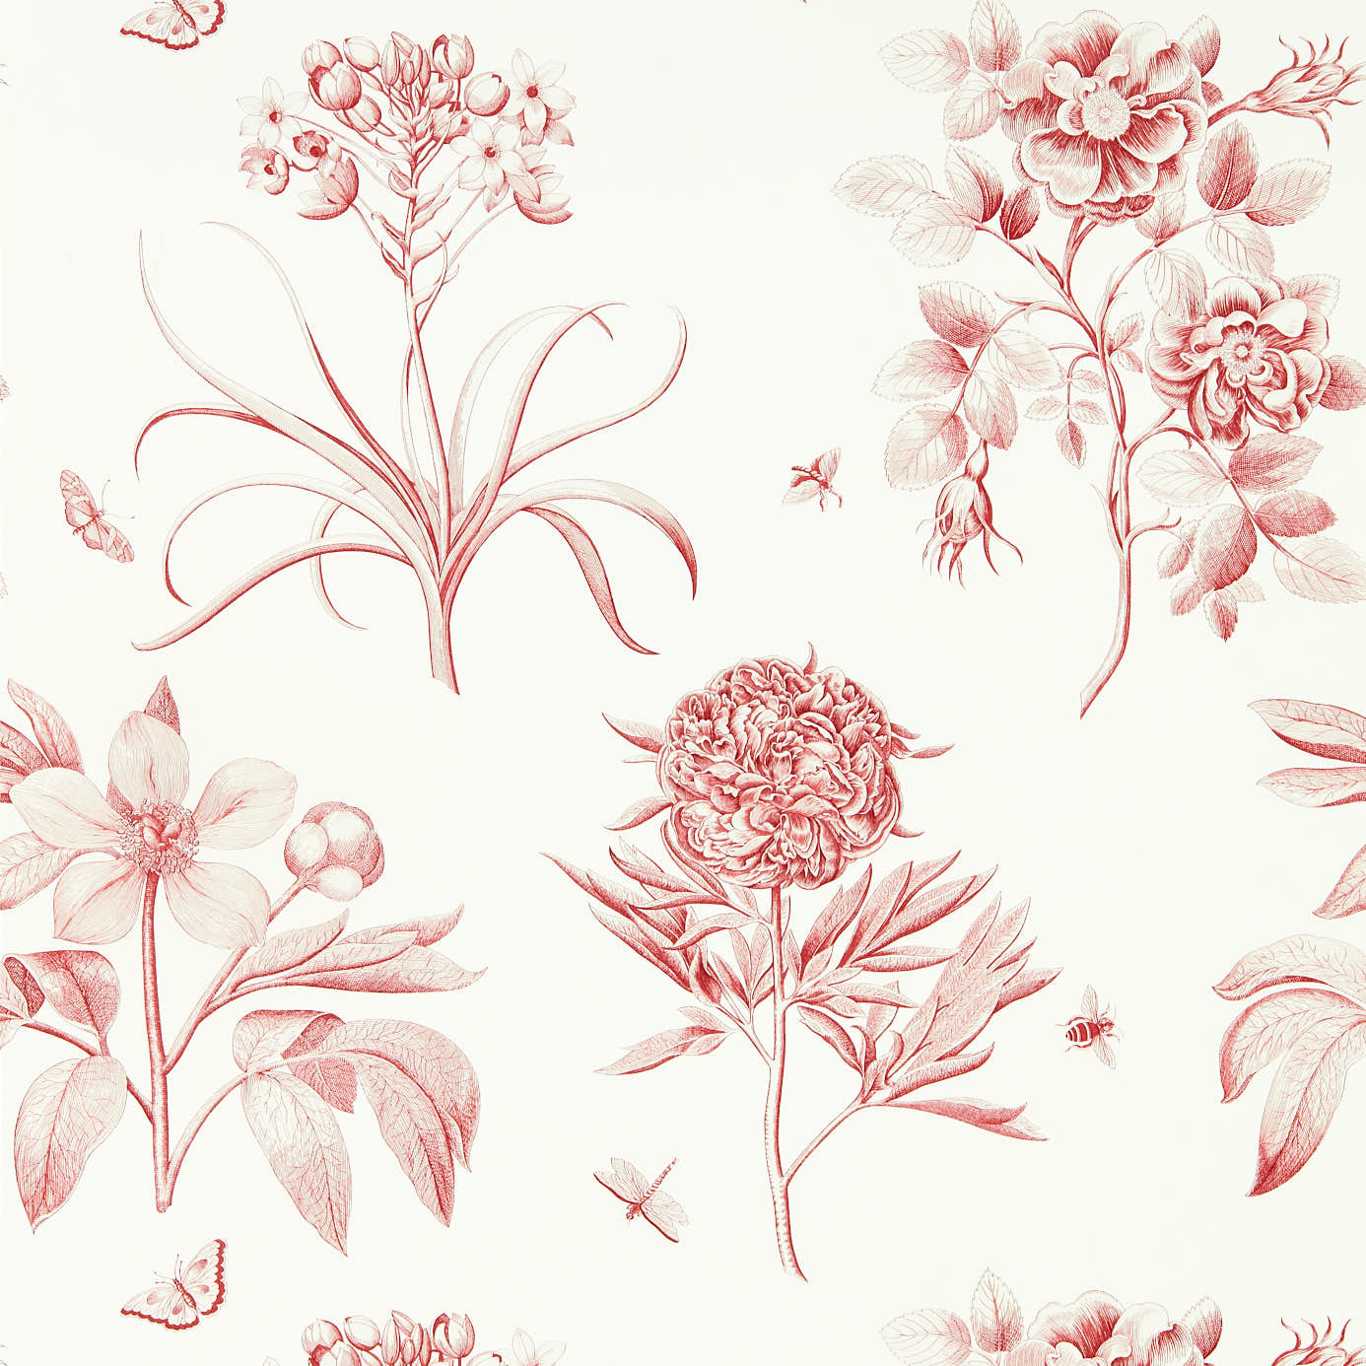 Etchings & Roses Wallpaper - Amanpuri Red - DOSW217054 - Sanderson - One Sixty - Morris Wallpaper